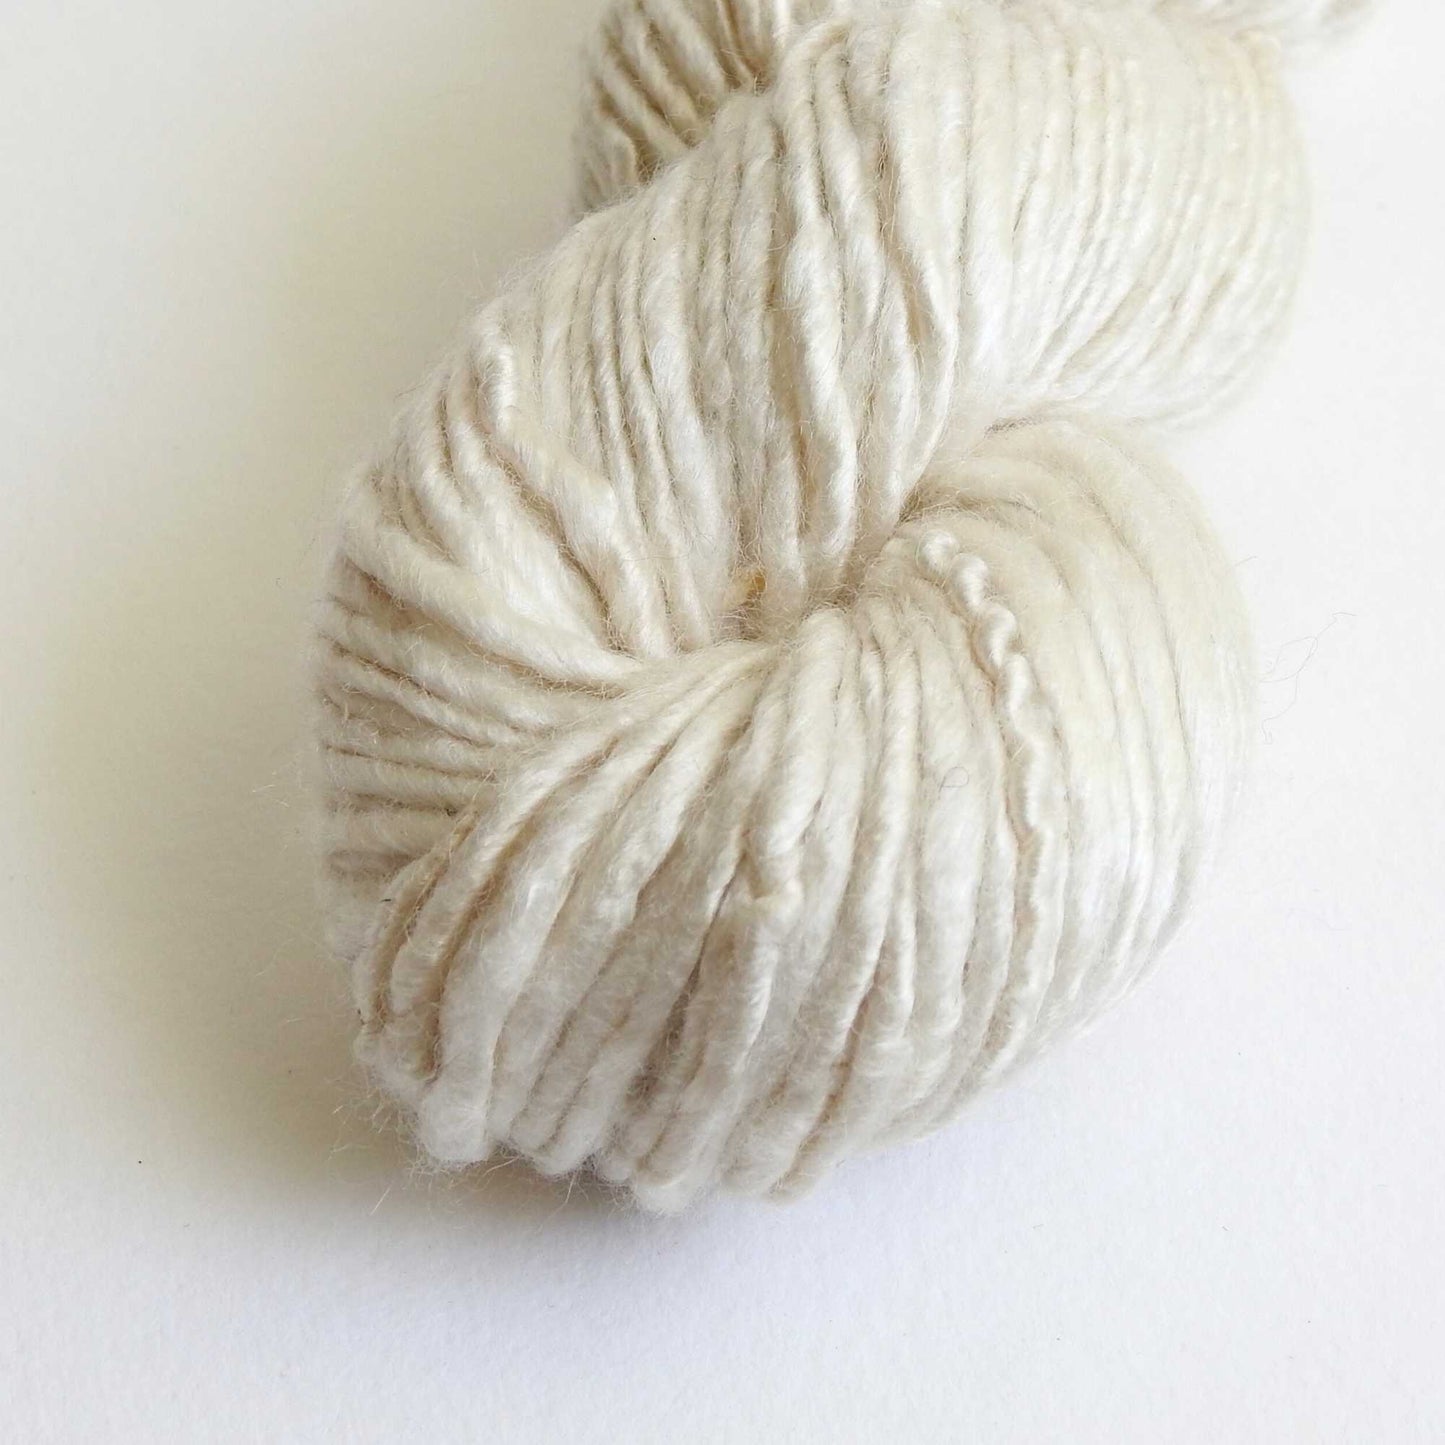 a skein of bamboo yarn in natural. a vegan yarn which is ideal for knitting, weaving, crochet & craft. soft bamboo yarn